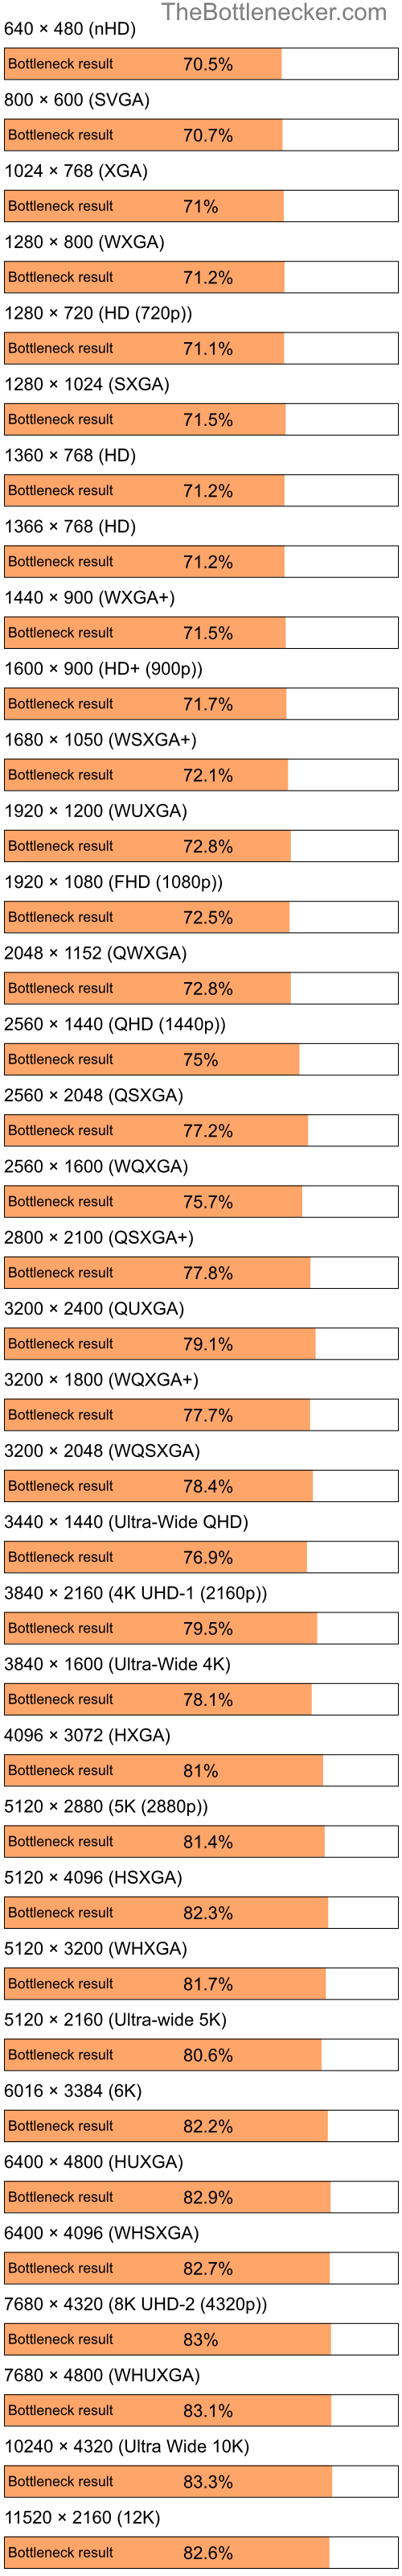 Bottleneck results by resolution for Intel Atom Z520 and AMD M880G with Mobility Radeon HD 4200 in Graphic Card Intense Tasks